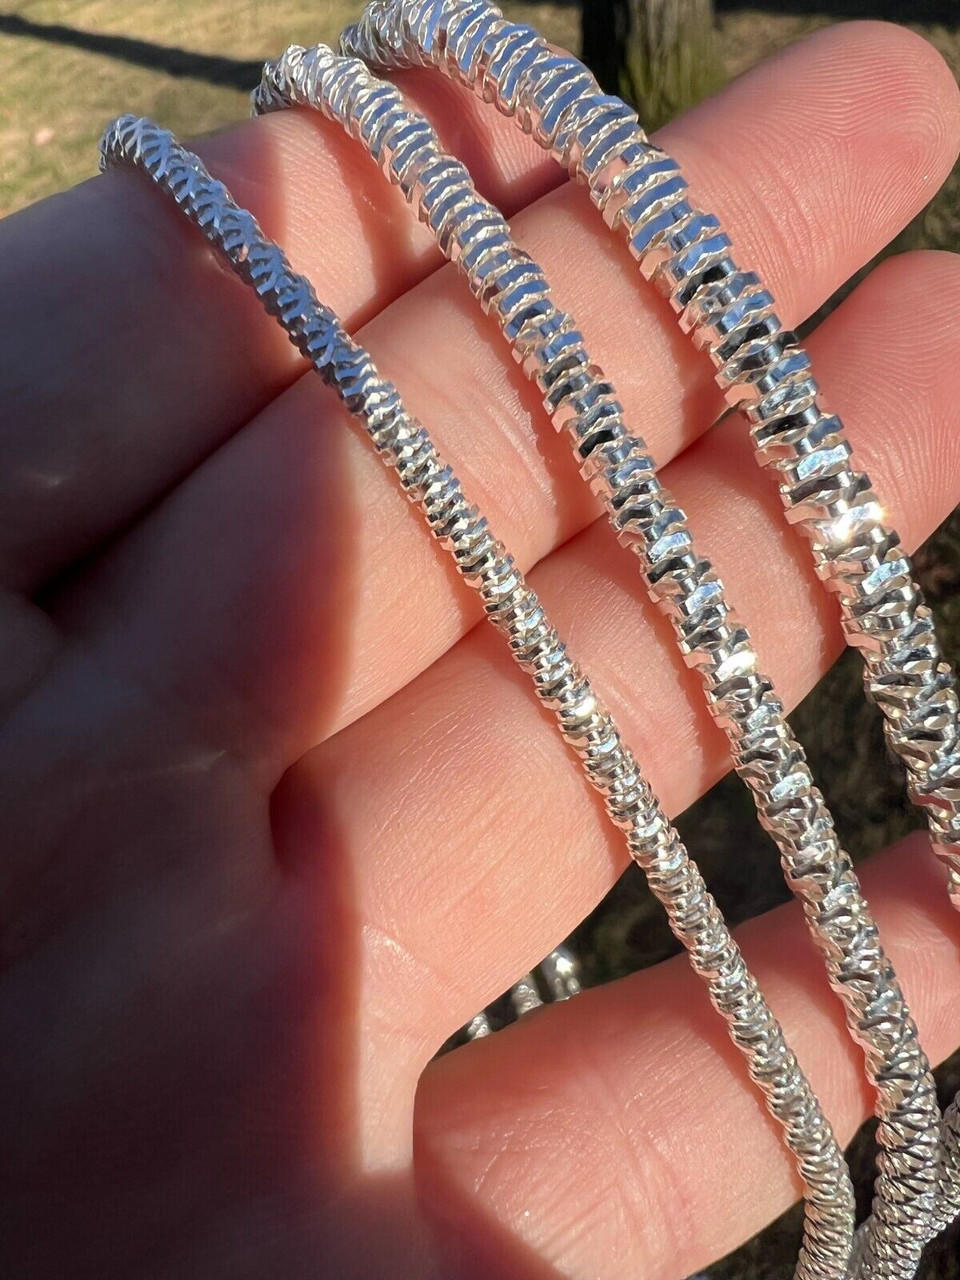 Real 925 Sterling Silver Diamond Cut Sparkle Ice Rope Chain